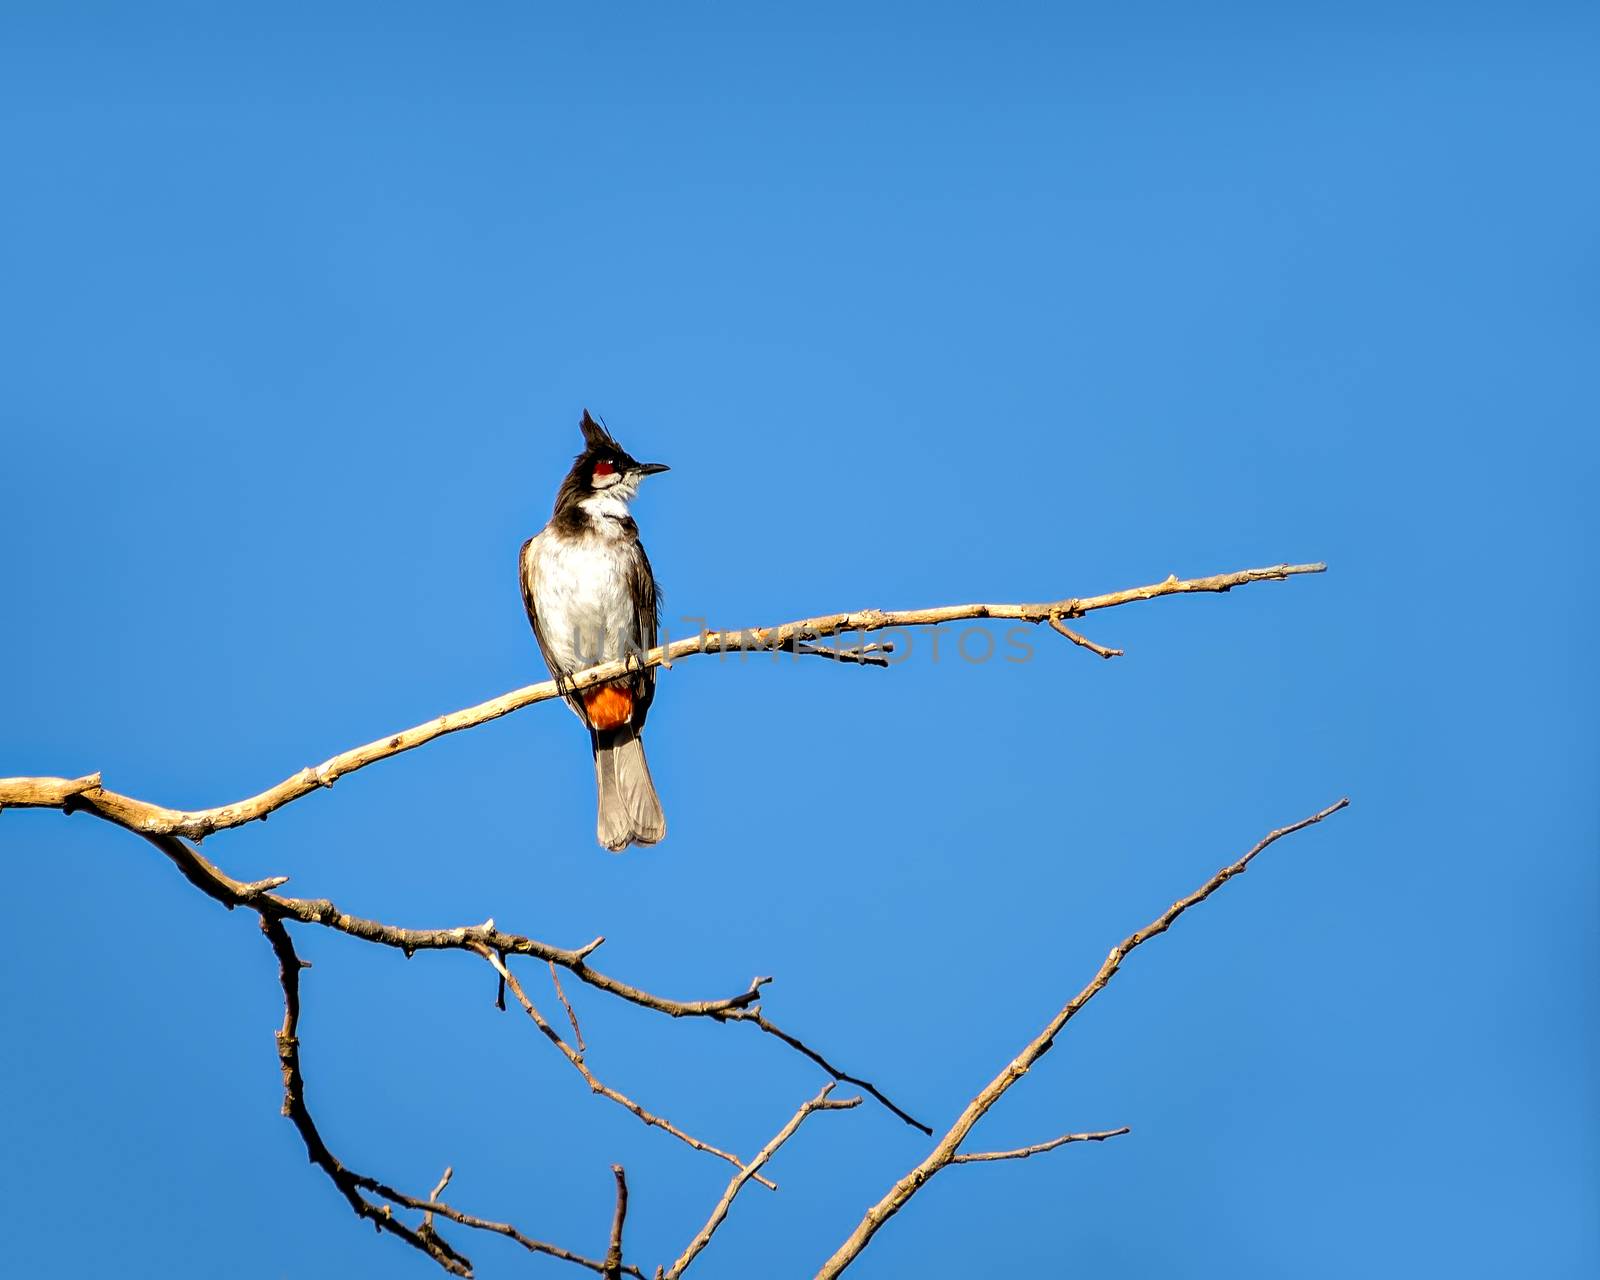 Red vented bulbul sitting on dry tree branch with clear blue sky background.